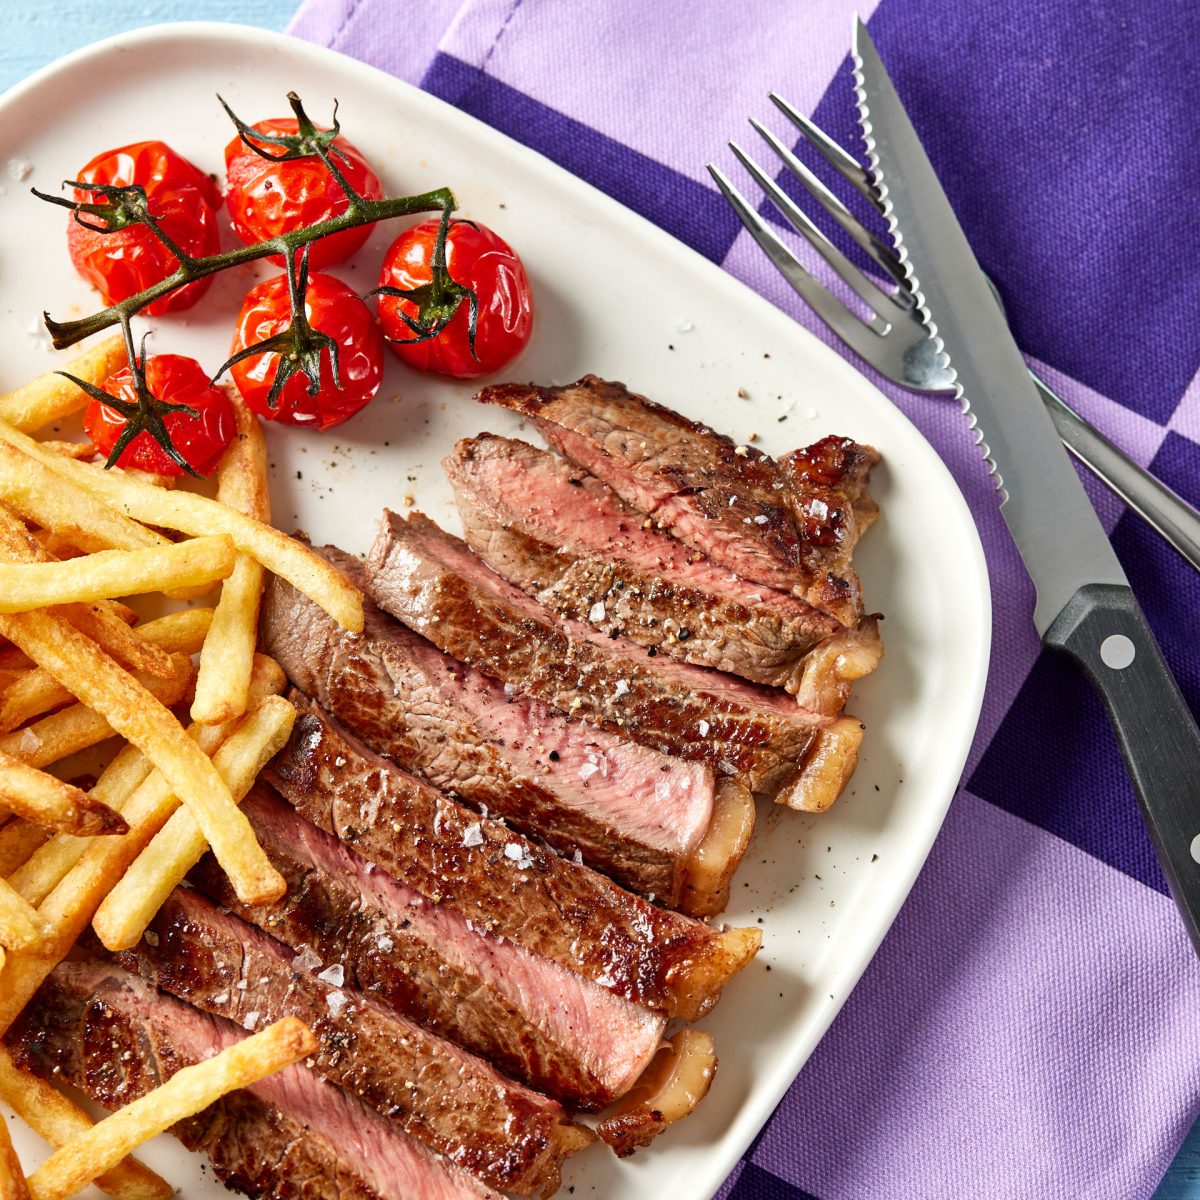 Sliced sirloin steak on a square plate with chips and roasted cherry tomatoes on a purple background